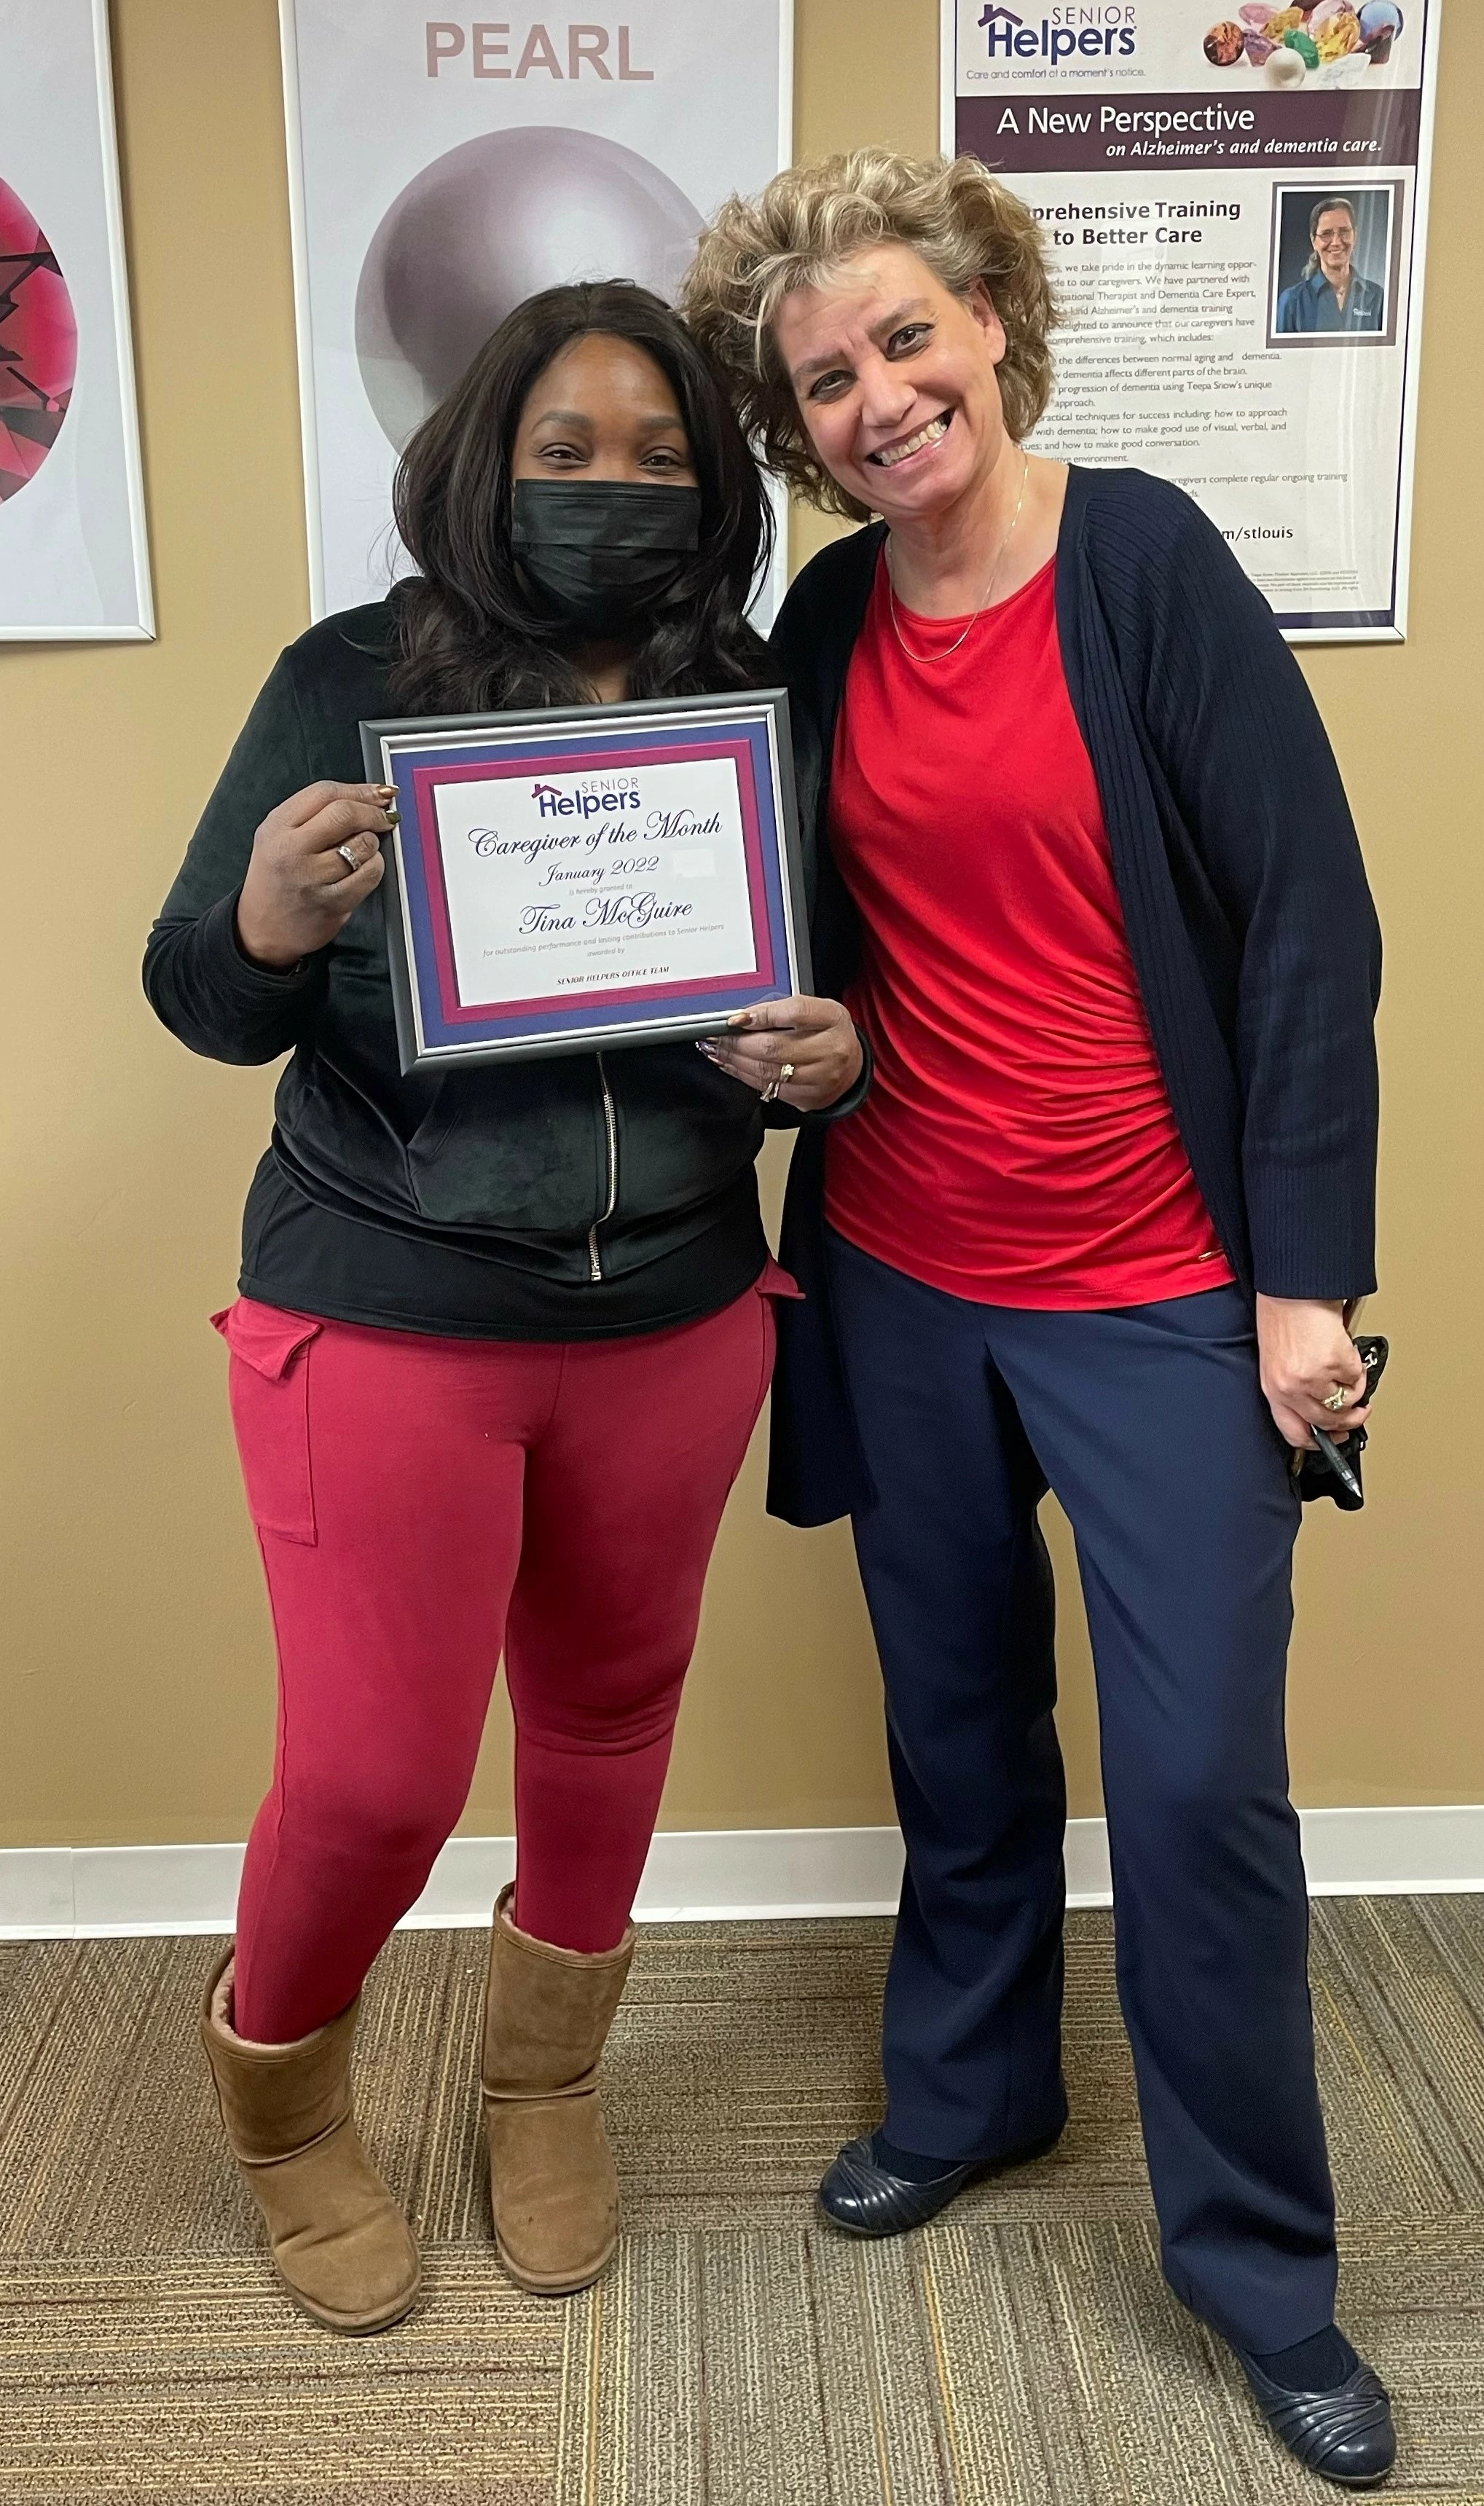 Congratulations Tina on receiving the January Caregiver of the Month award!